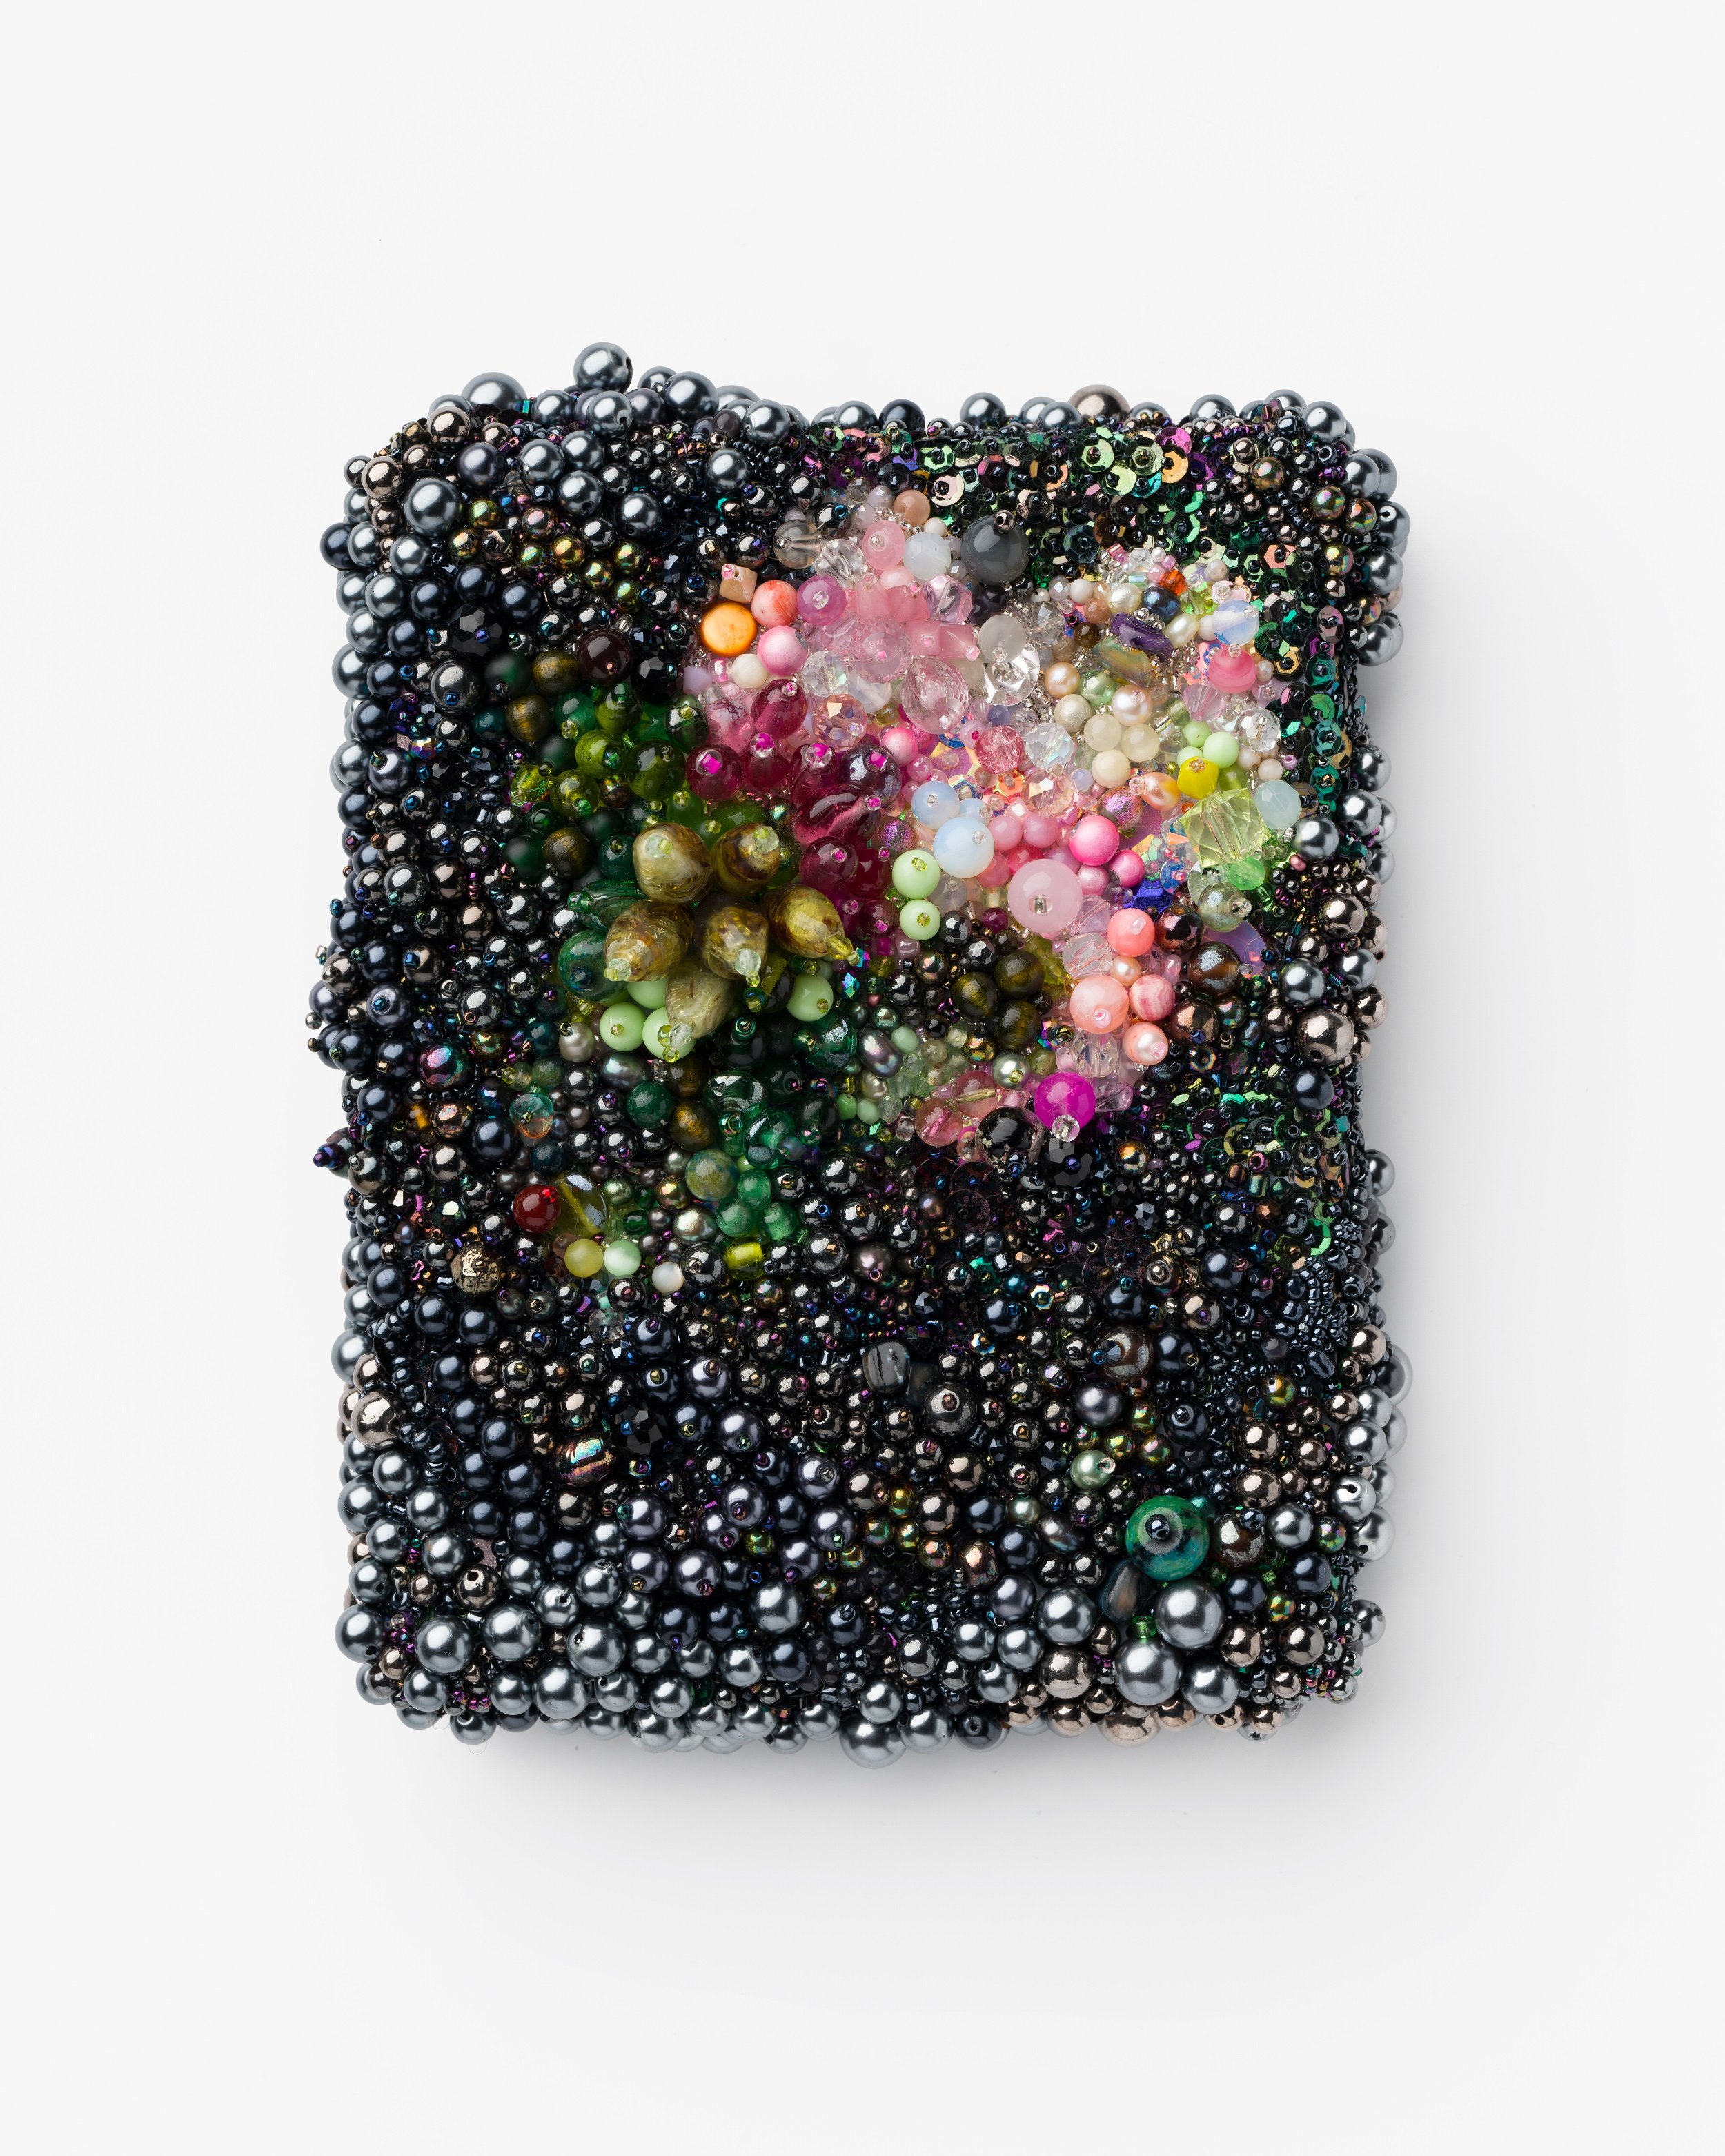   A moment eternal, no. 5 (pink, green, after midnight and before dawn)    2020-2021   Beading of vintage and antique glass, plastic, pearls, swarovski crystal, quartz, rose quartz, hematite, carnelian, watermelon tourmaline, coral, moss agate, bande